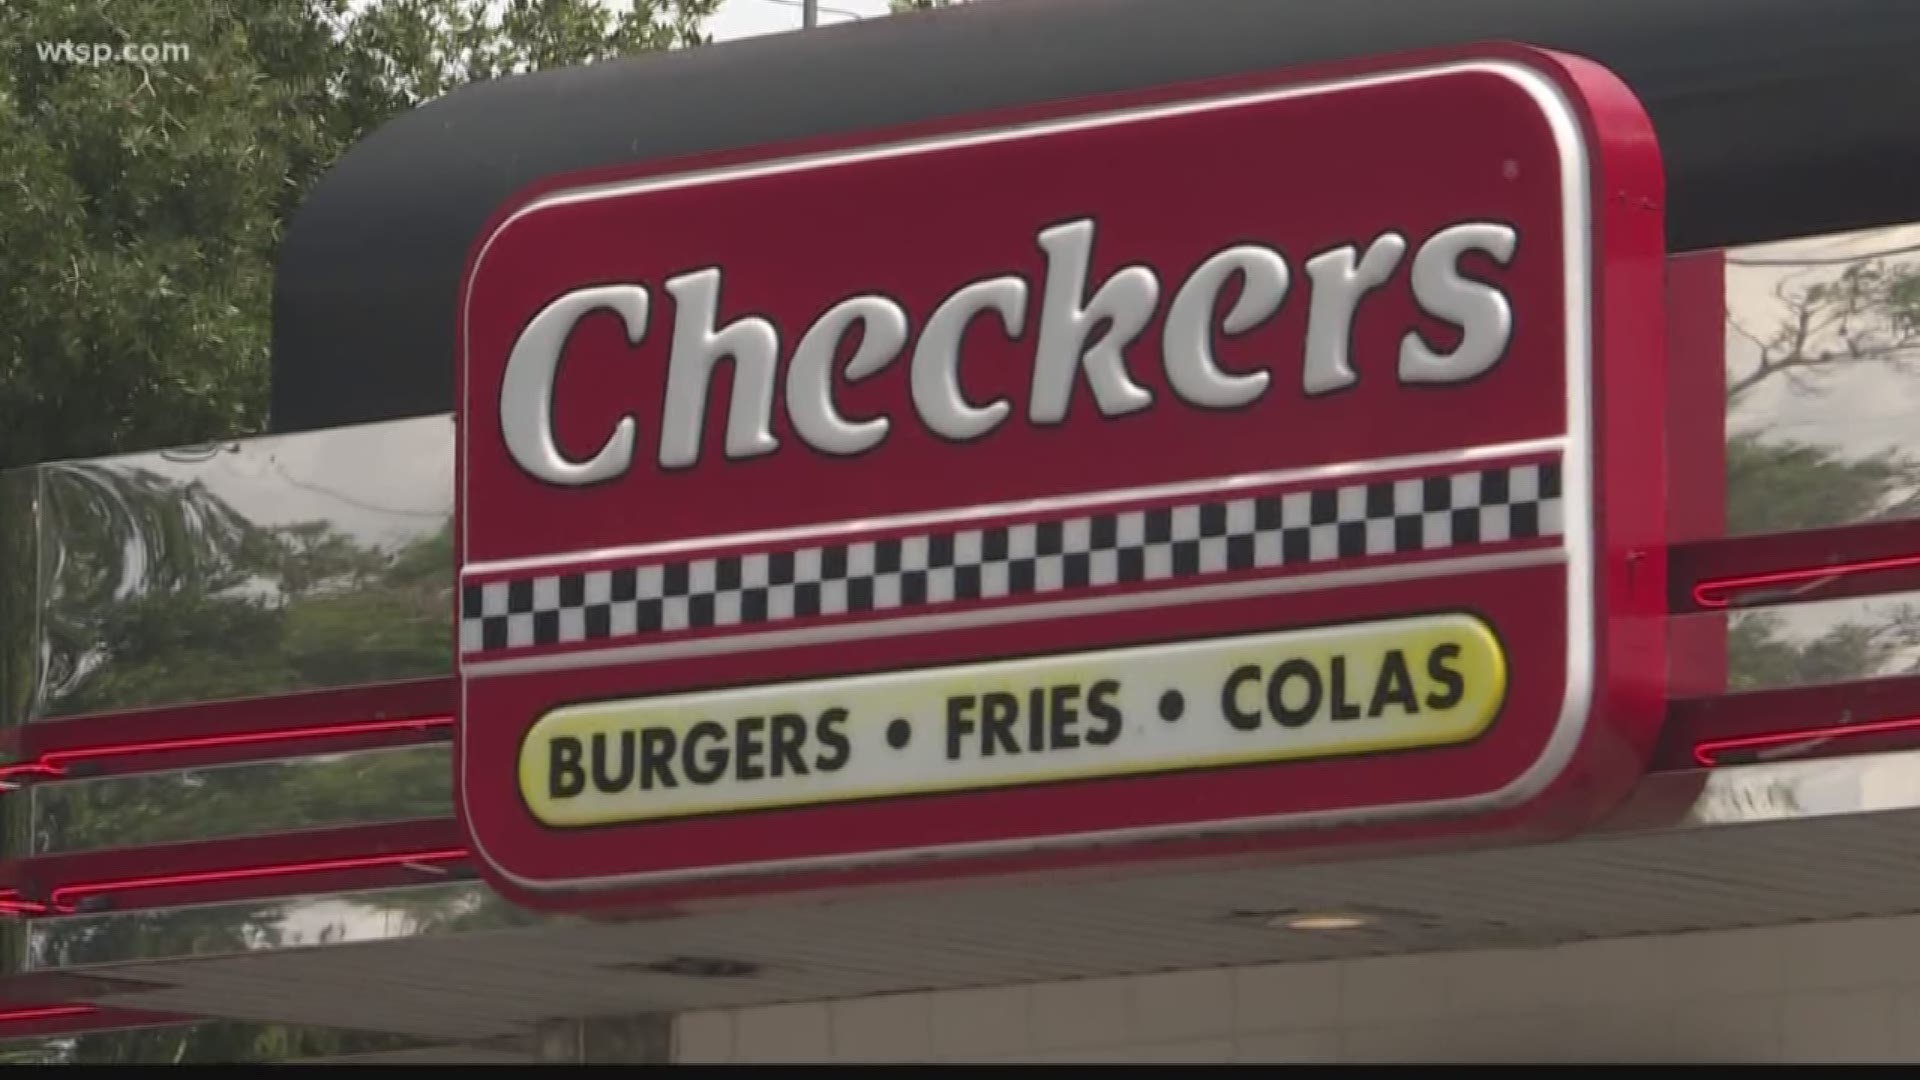 The data breach affects 15 Checkers restaurants in Florida. https://on.wtsp.com/2wCOmSF